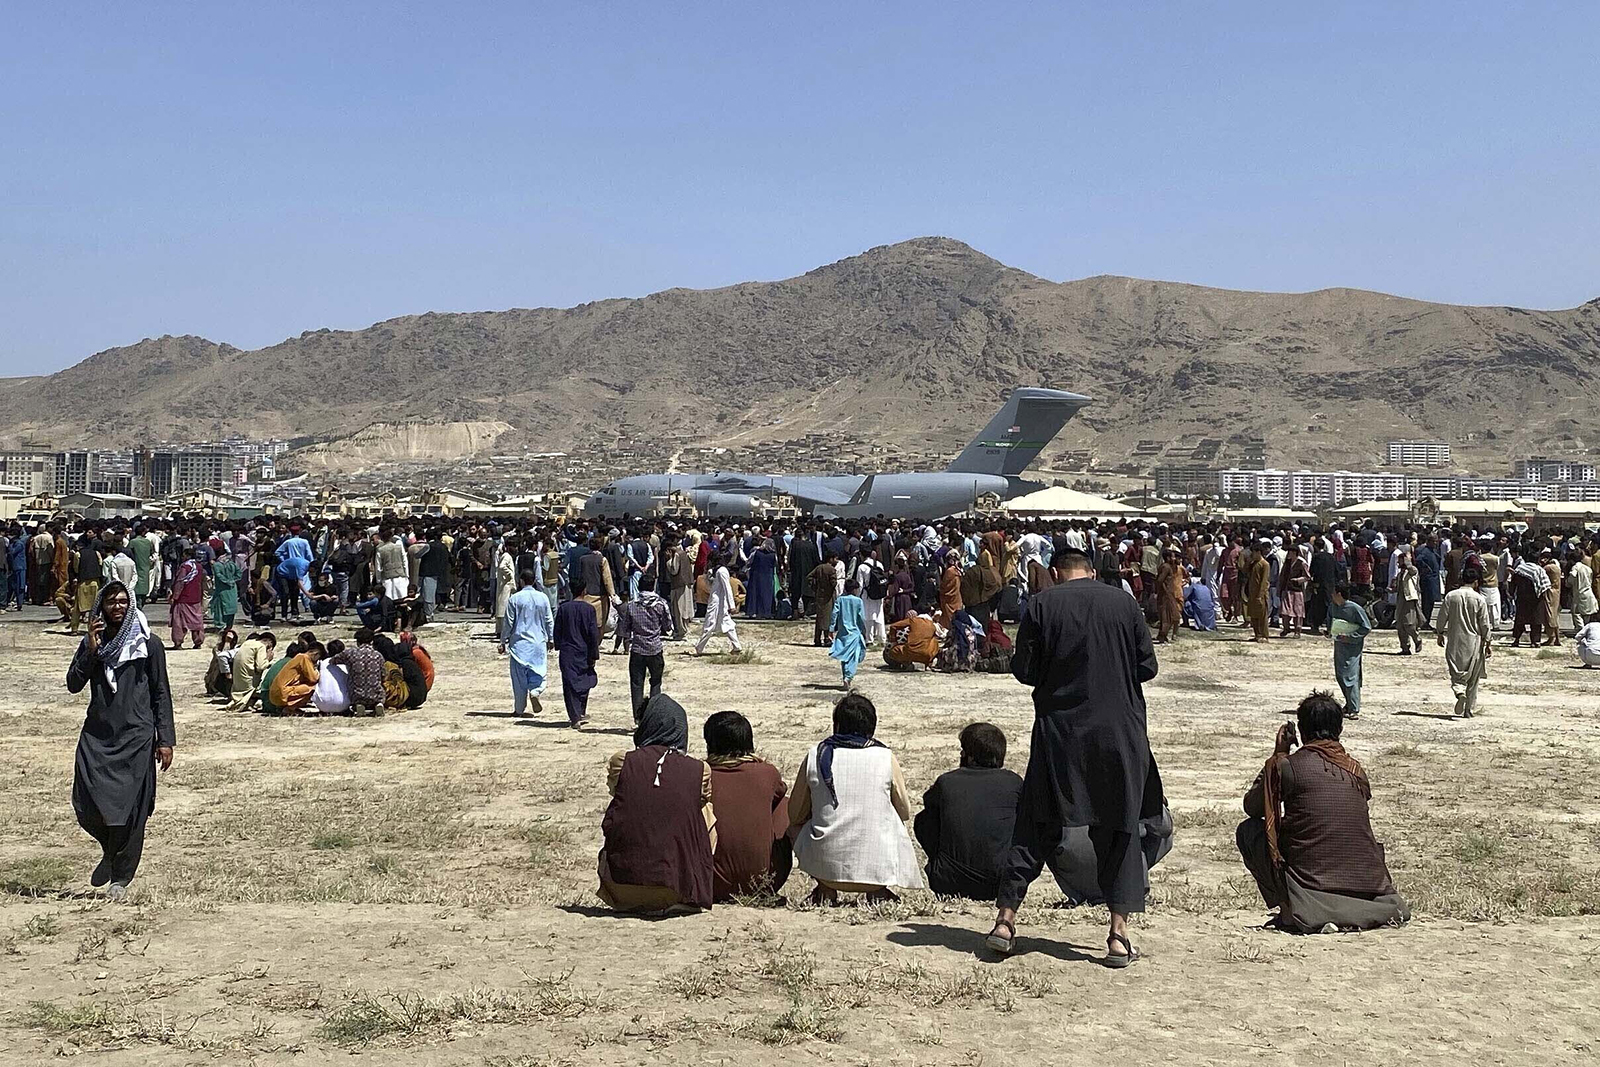 In this Aug. 16, 2021, file photo, hundreds of people gather near a U.S. Air Force C-17 transport plane along the perimeter at the international airport in Kabul, Afghanistan. After the Taliban takeover, employees of the collapsed government, civil society activists and women are among the at-risk Afghans who have gone into hiding or are staying off the streets. They hope for a way to leave their homeland. (AP Photo/Shekib Rahmani, File)